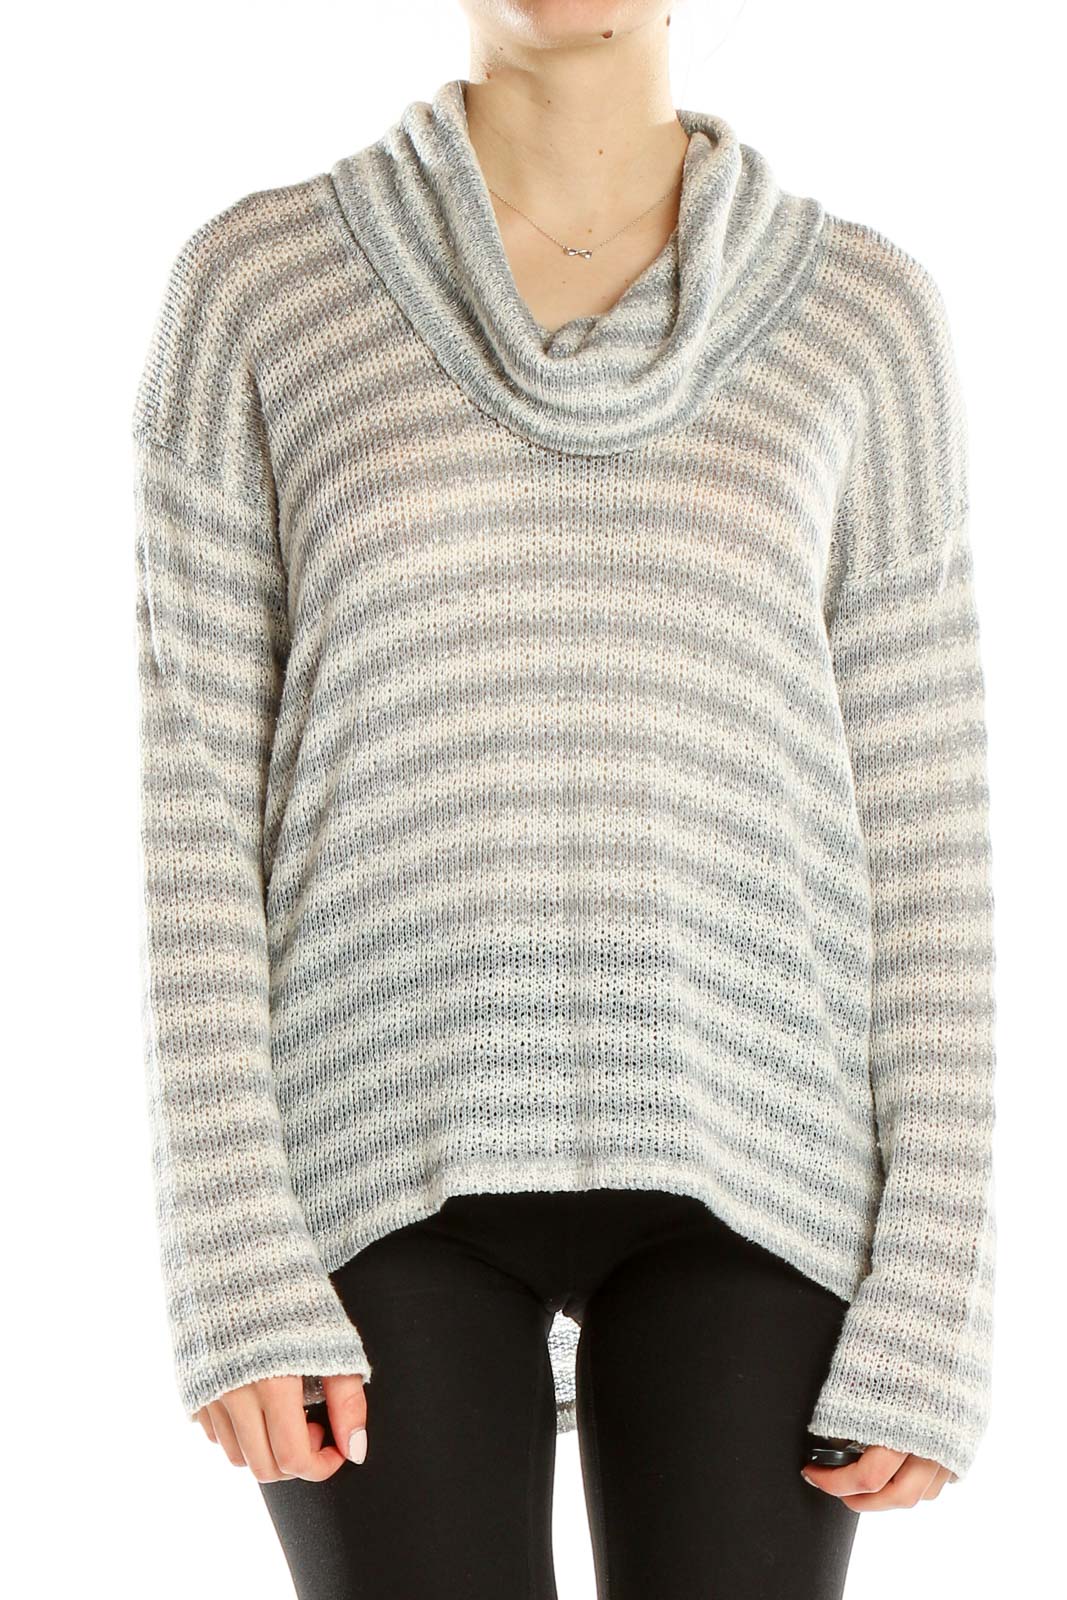 Gray Striped Knitted All Day Wear Top Front